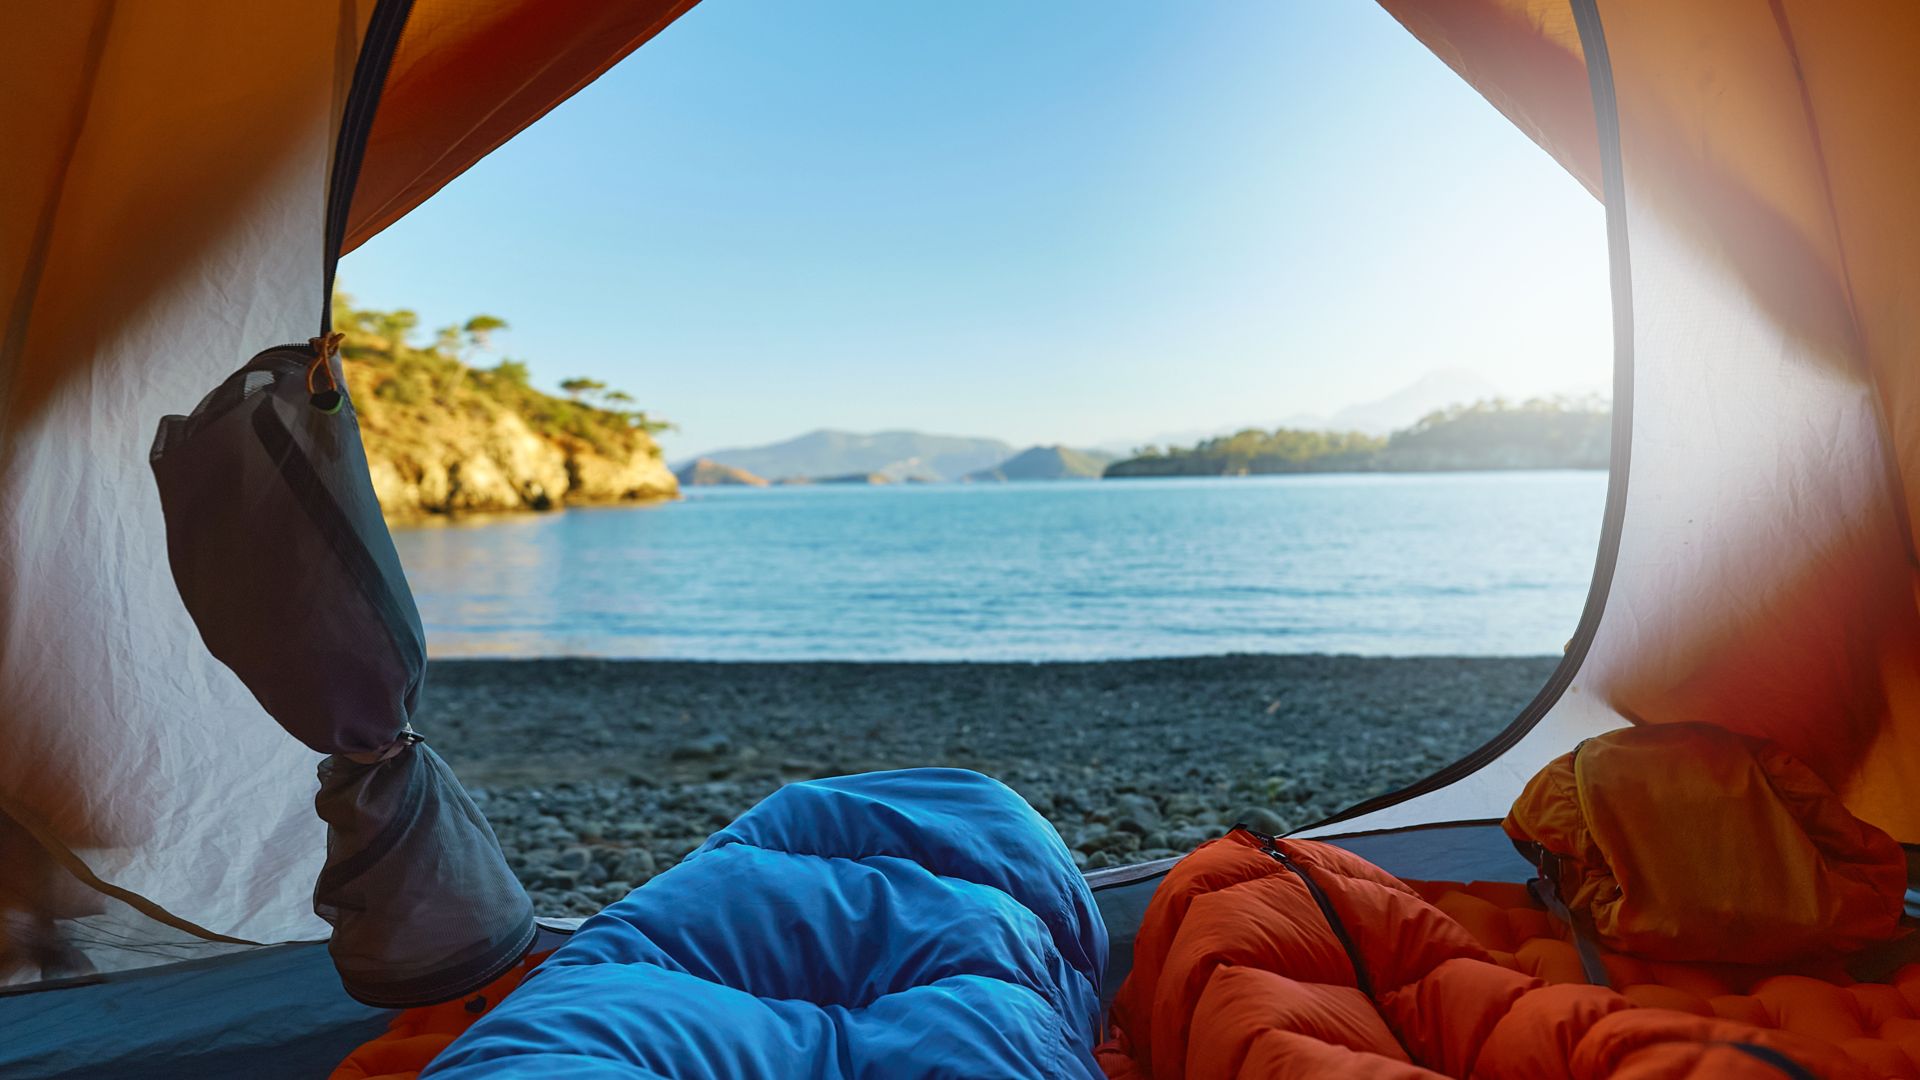 L2 Capital Partners has sold Worldwide Camping Holdings to Clearview Capital